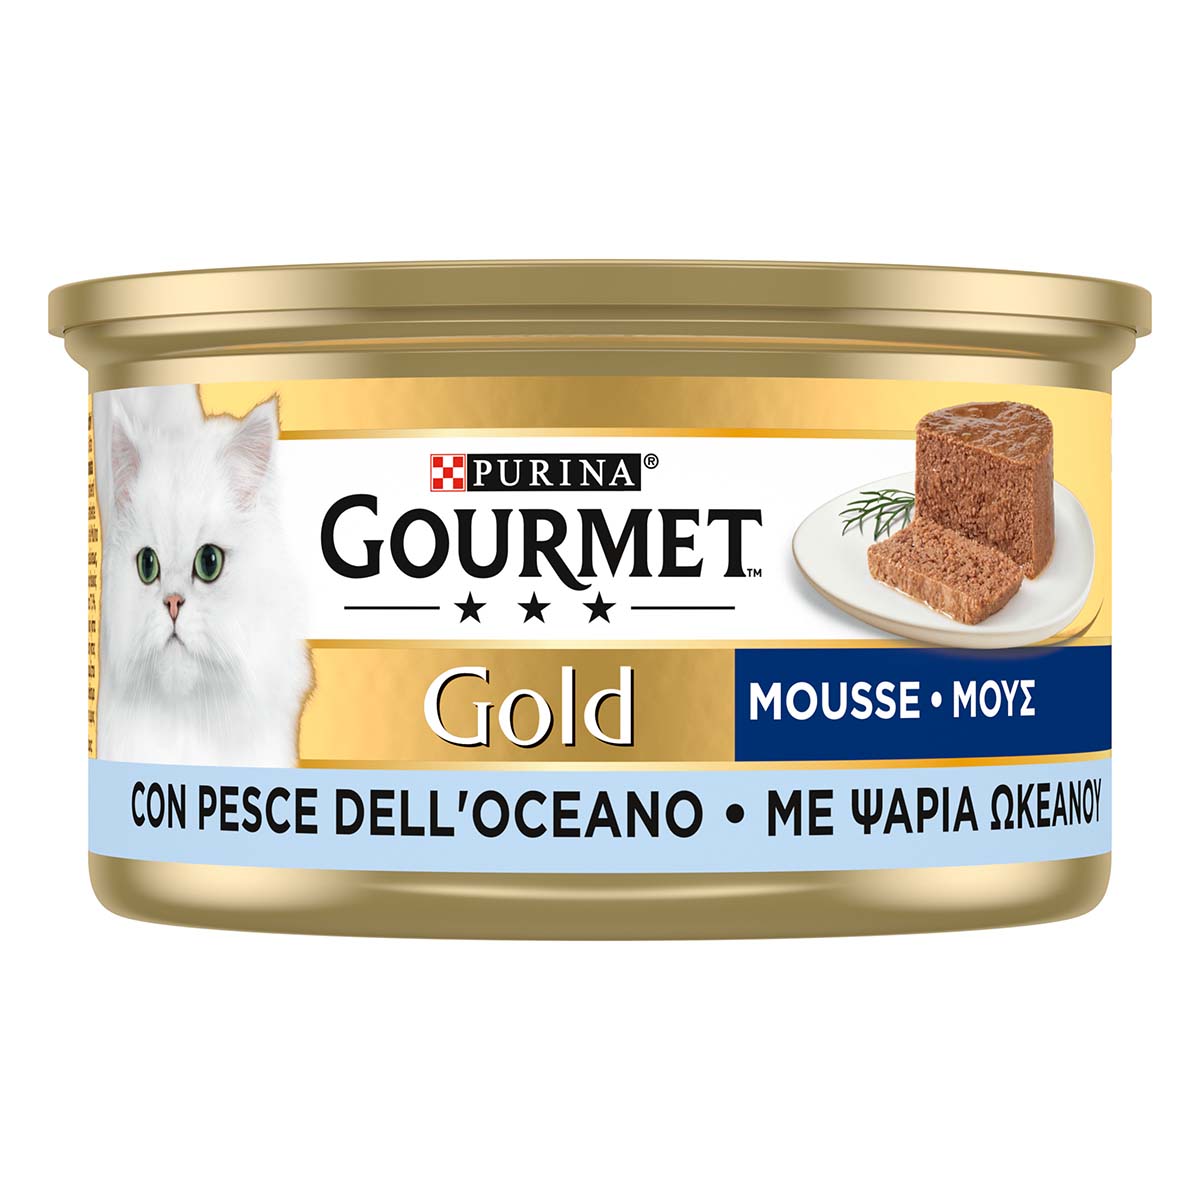 GOURMET GOLD Mousse con Pesce dell'oceano